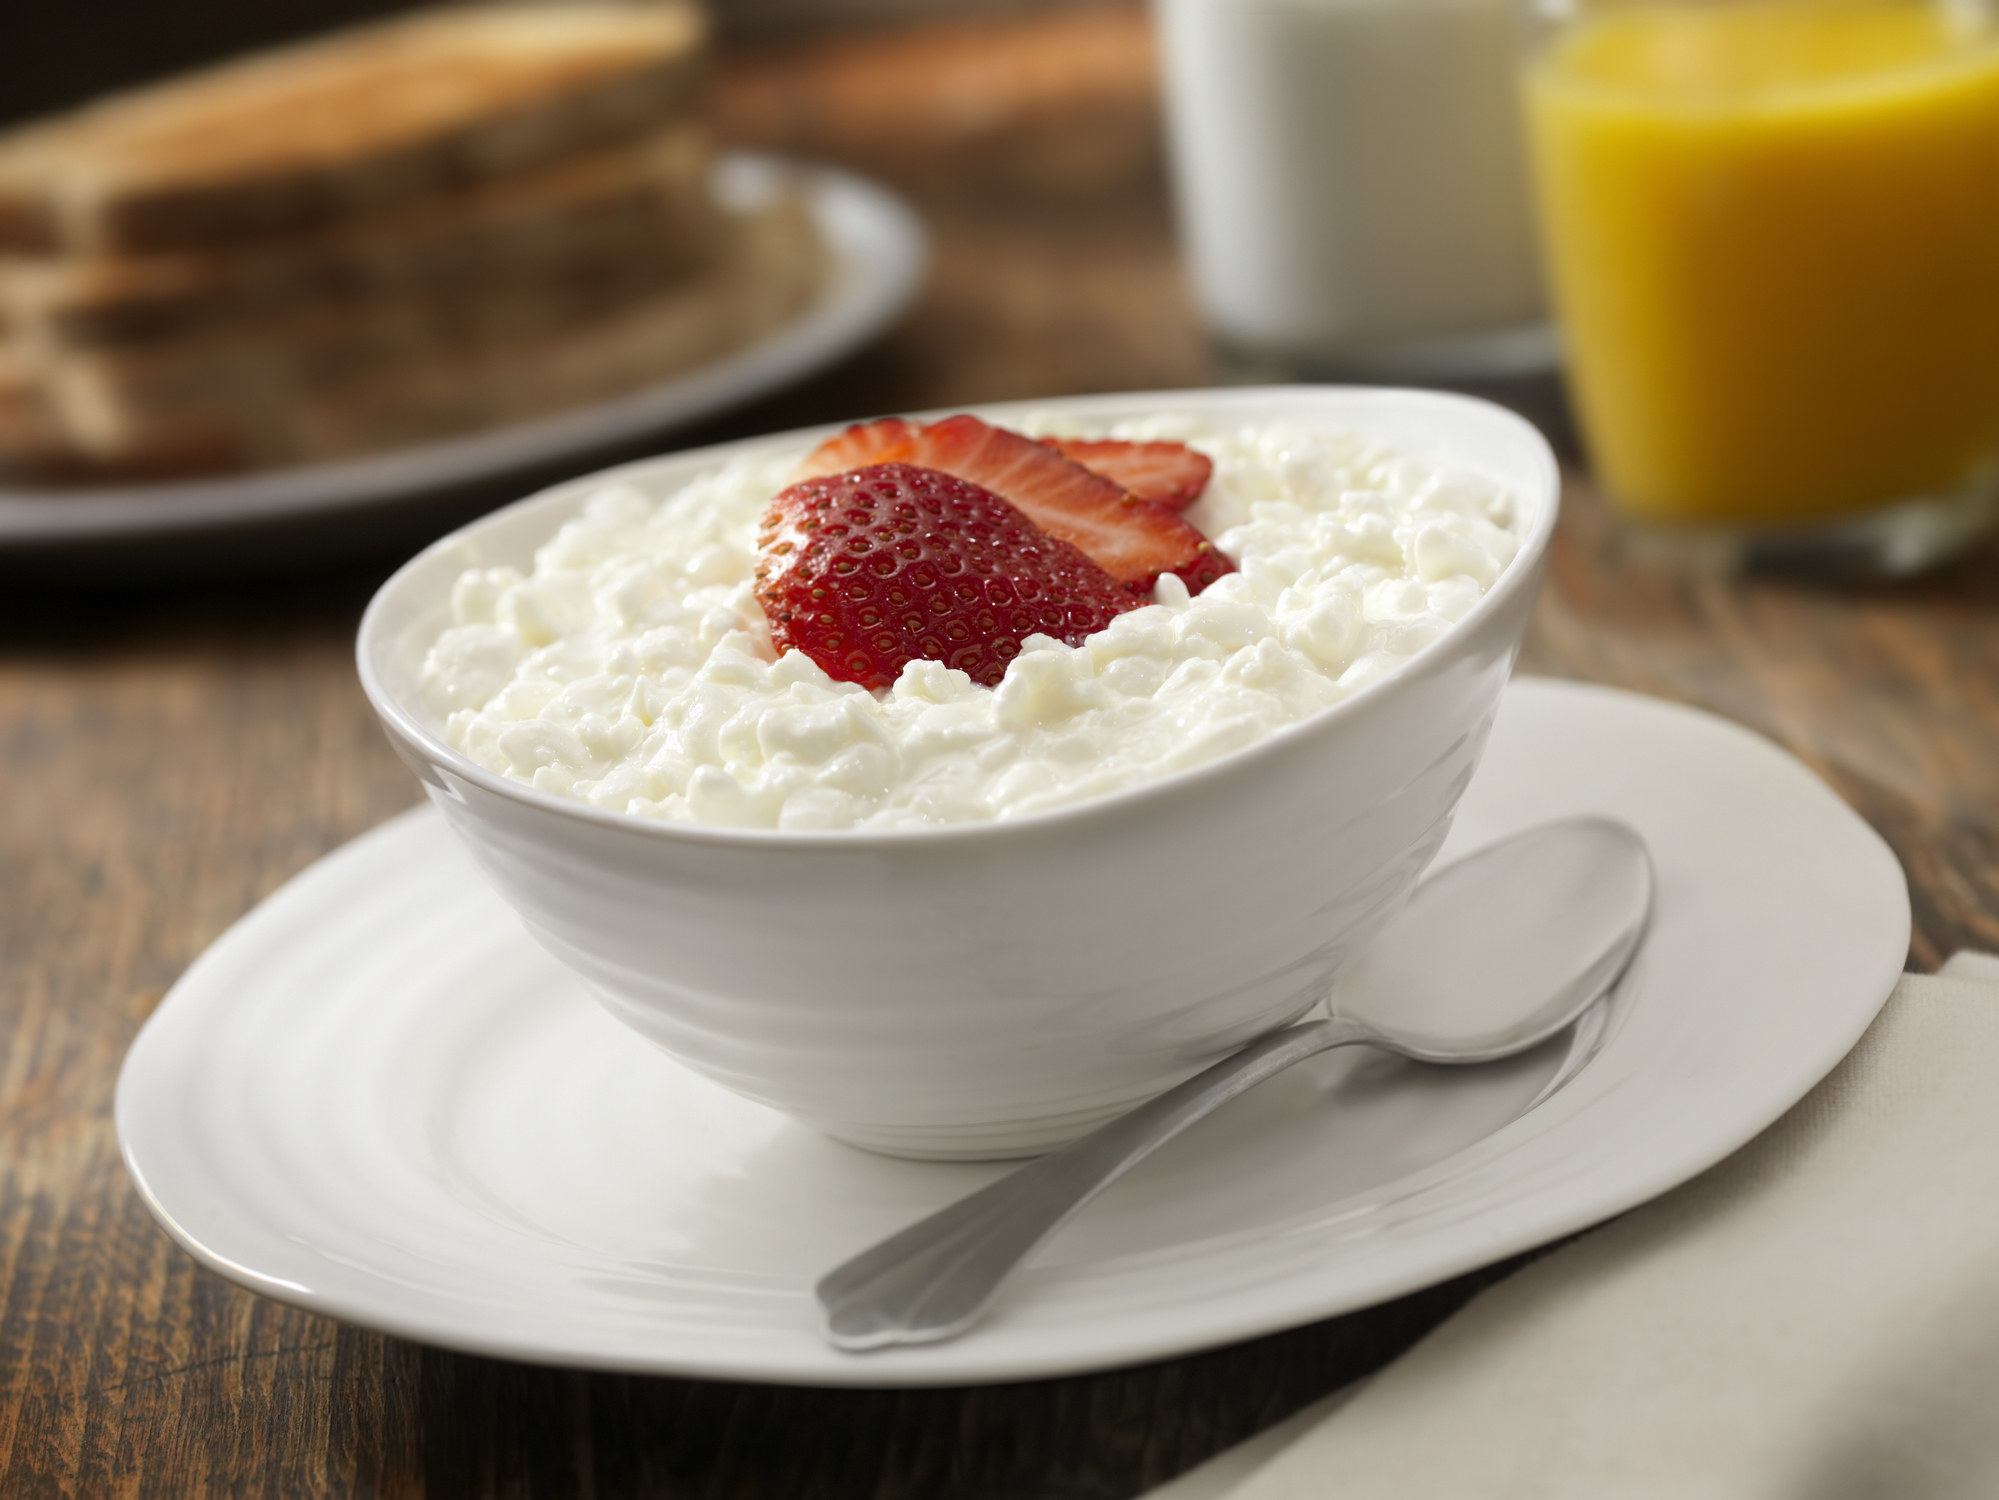 Cottage cheese with fresh strawberries.